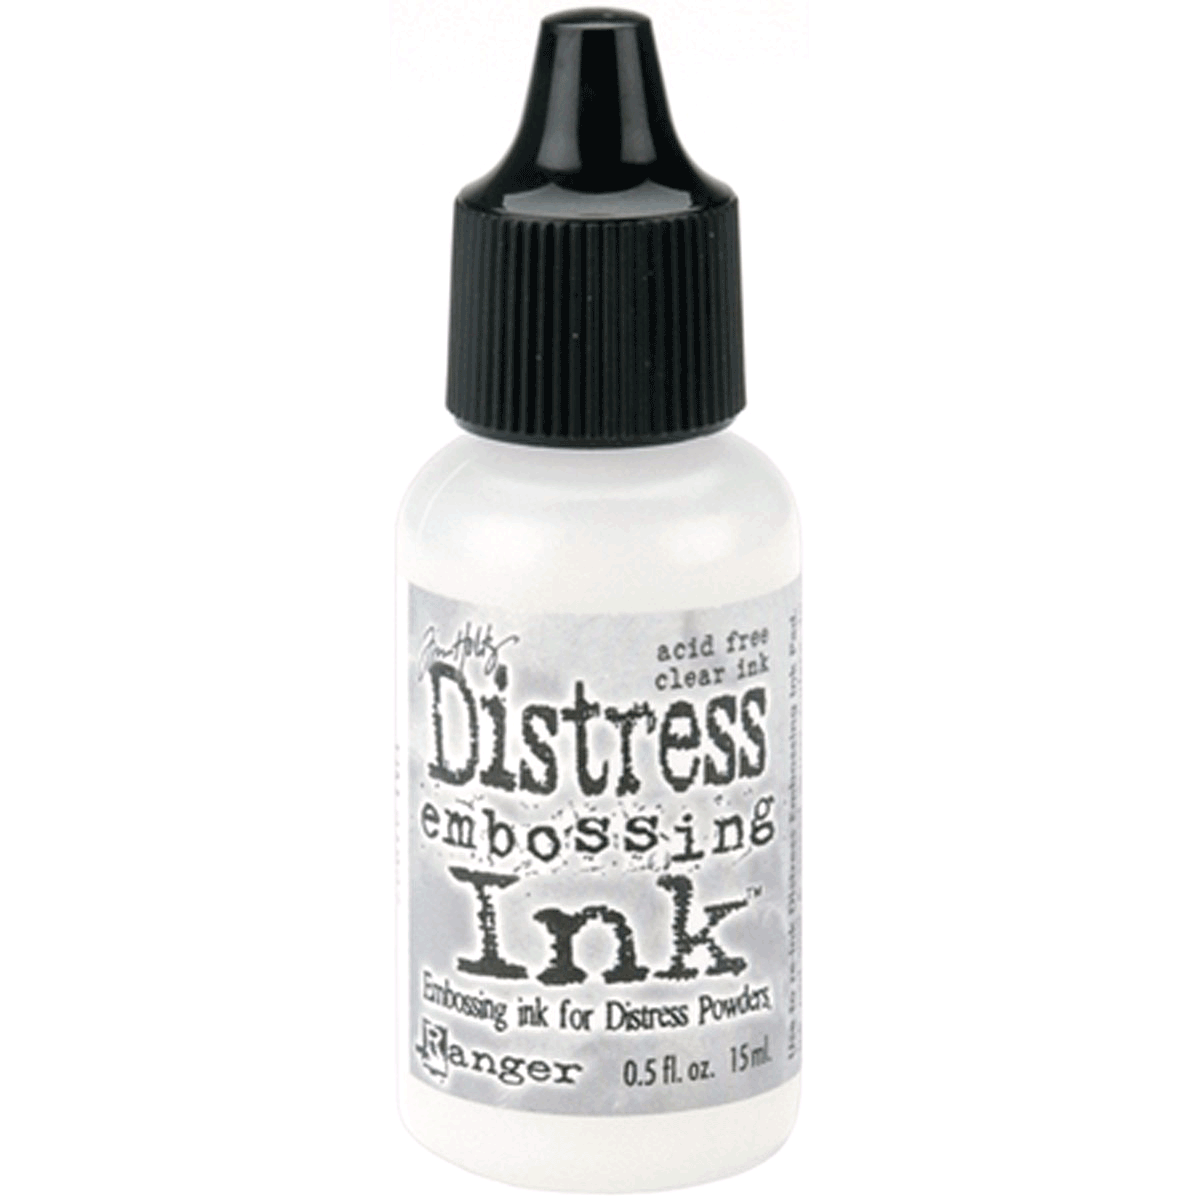 Tim Holtz Distress Embossing Clear Ink Pad Re-Inker, 0.5oz